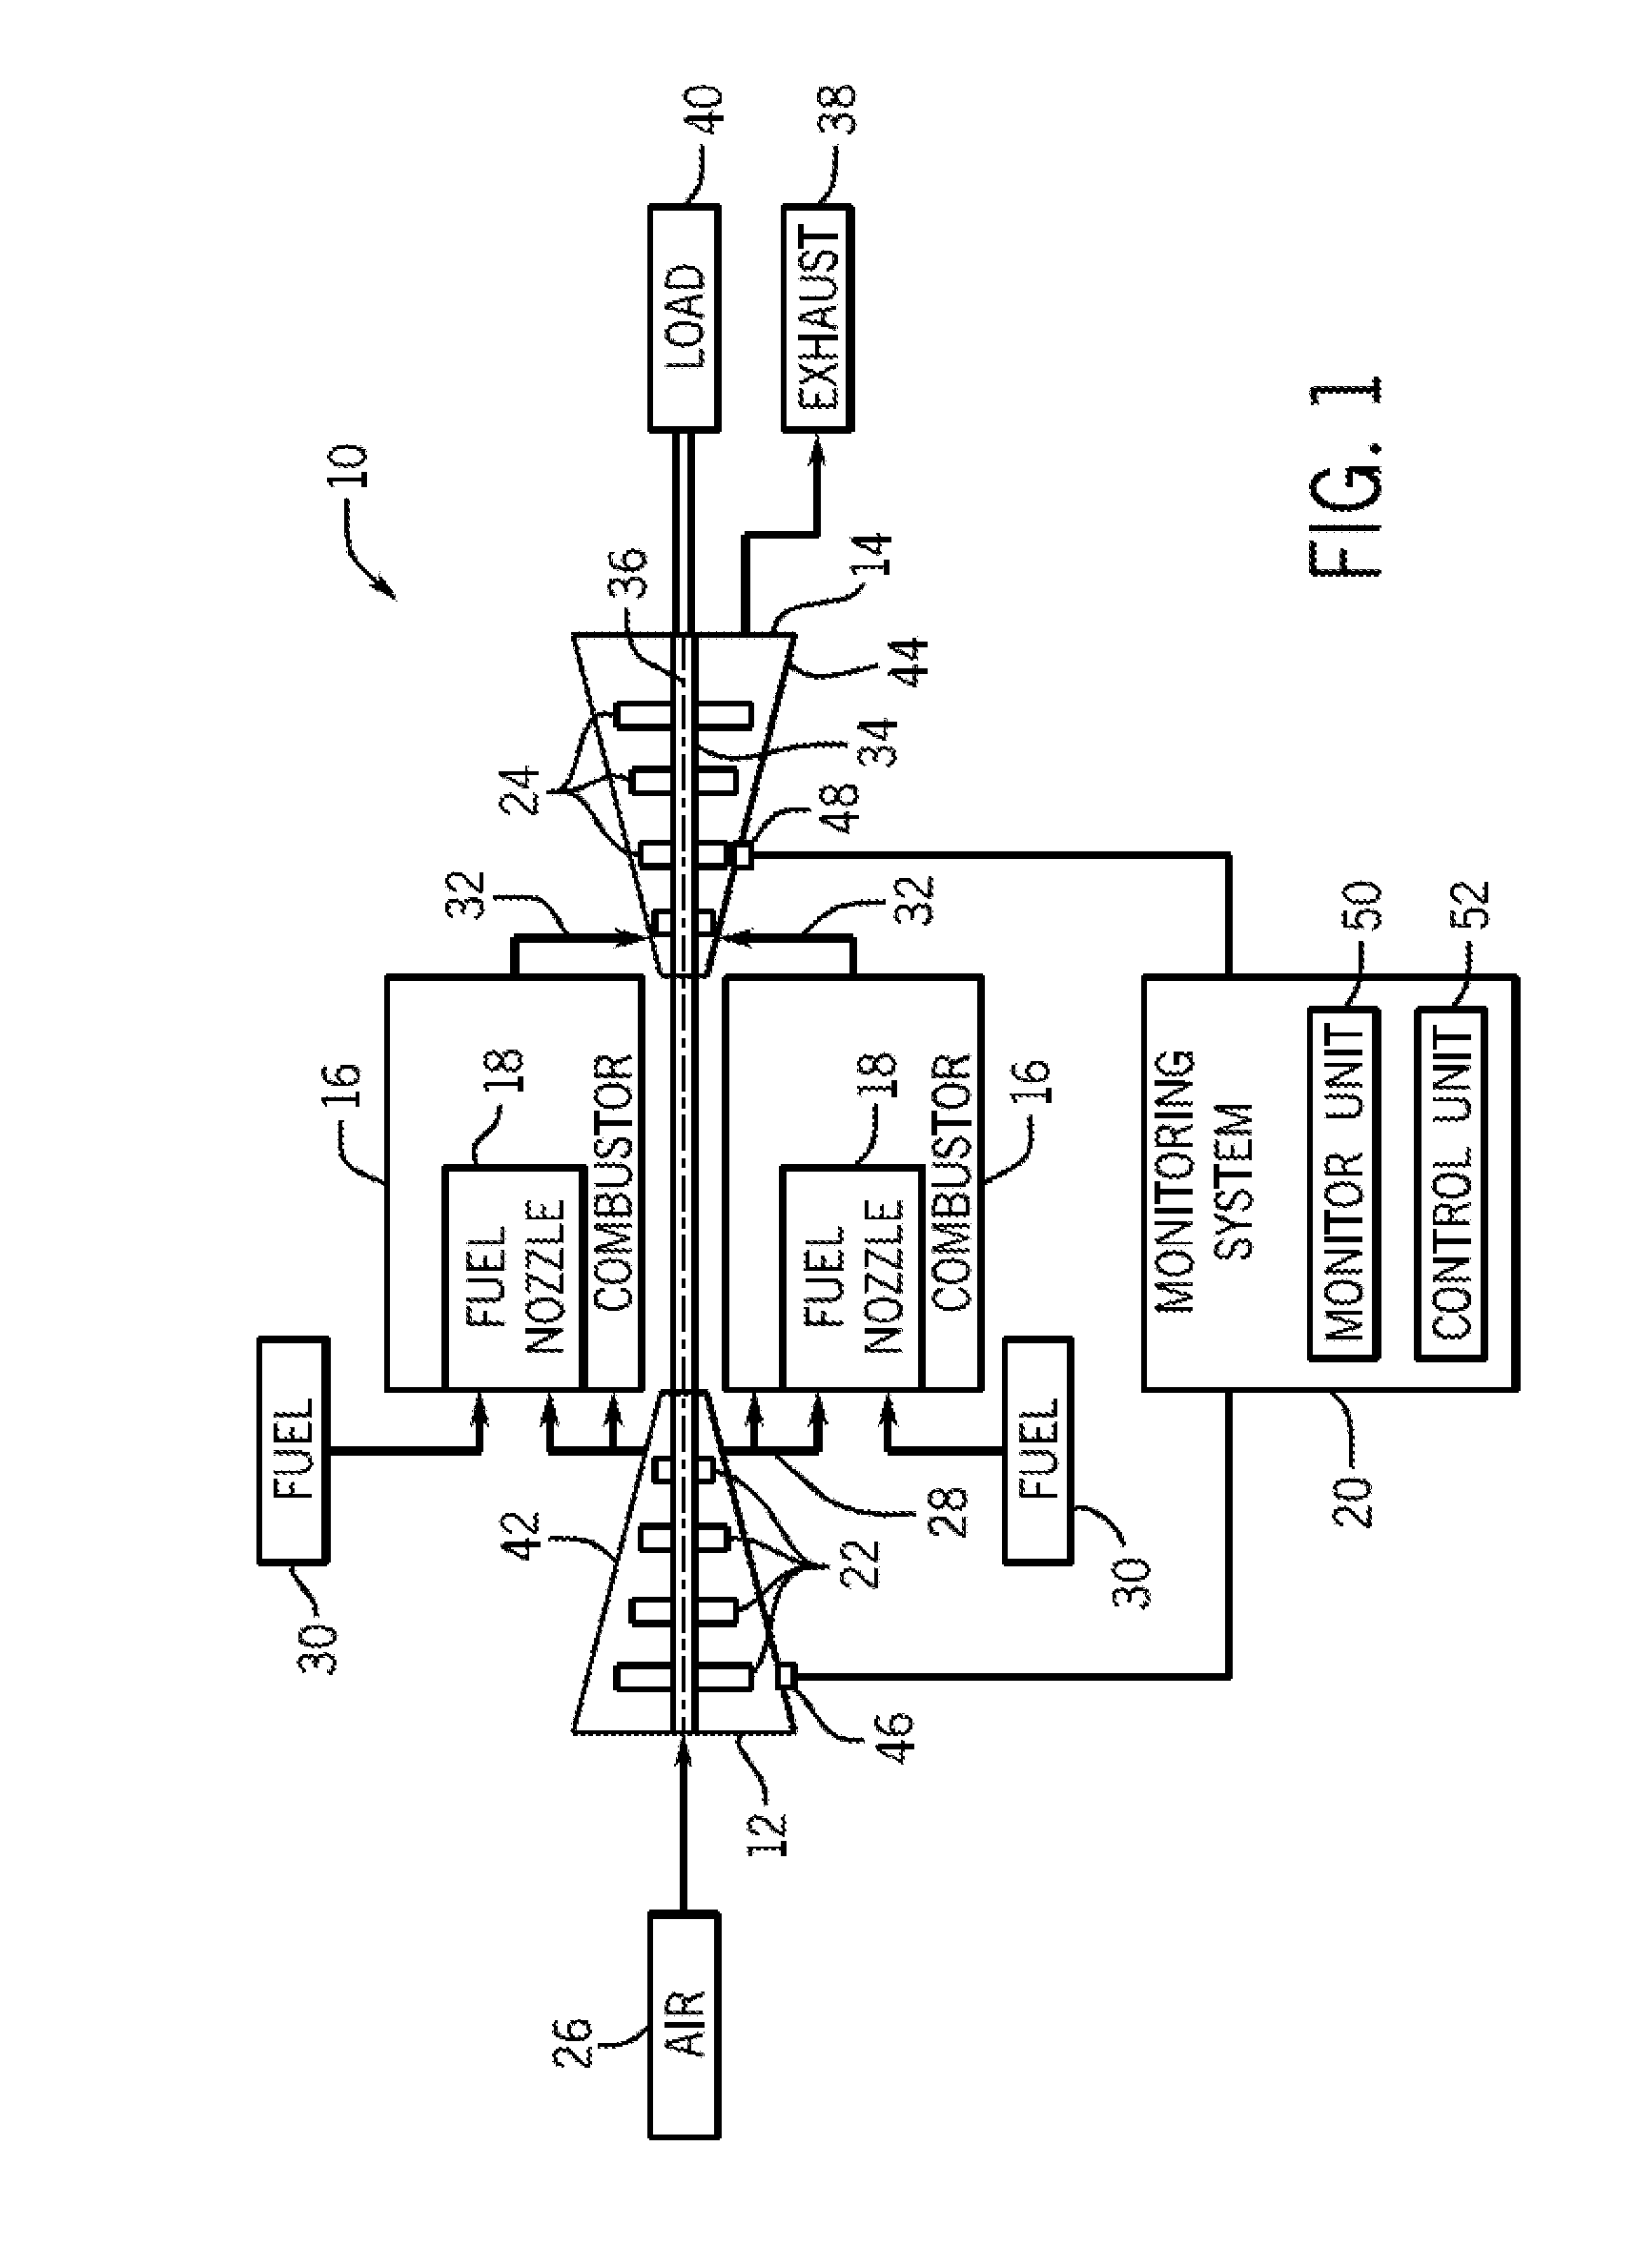 Turbomachine monitoring system and method